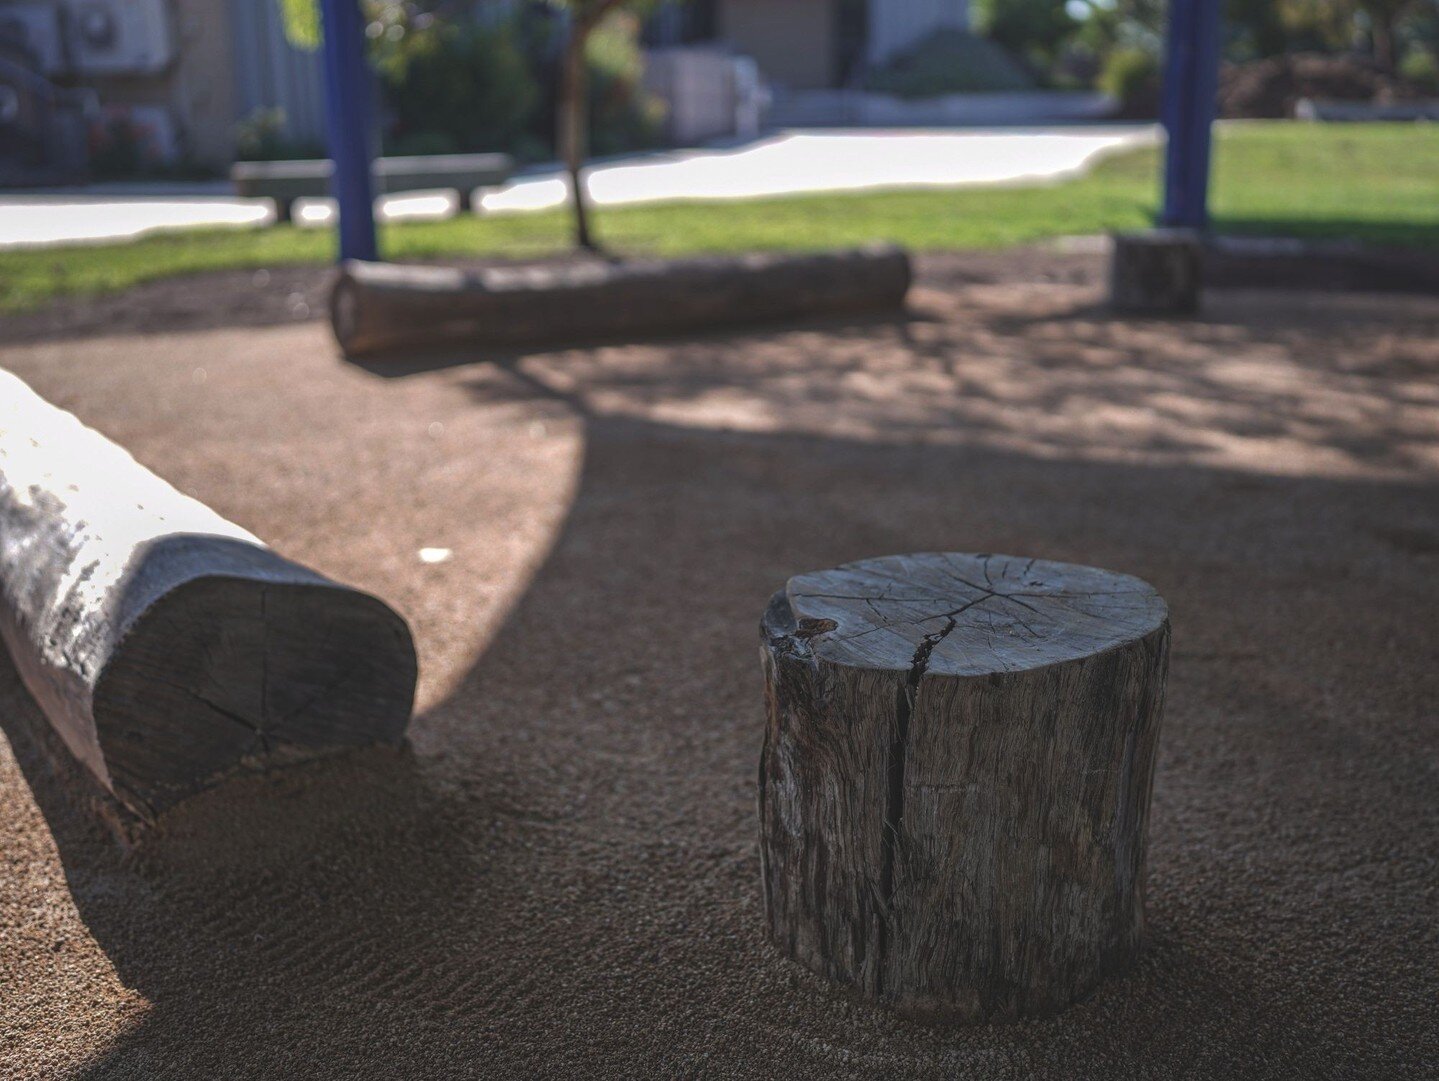 &ldquo;nganggali ngara ngura&rdquo; - Talking Listening Place.⁠
⁠
Working closely with the Indigenous Perspectives Leader at the St Mary Mackillop Catholic Primary School in Bannockburn Humble Ground designed, sourced local materials and constructed 